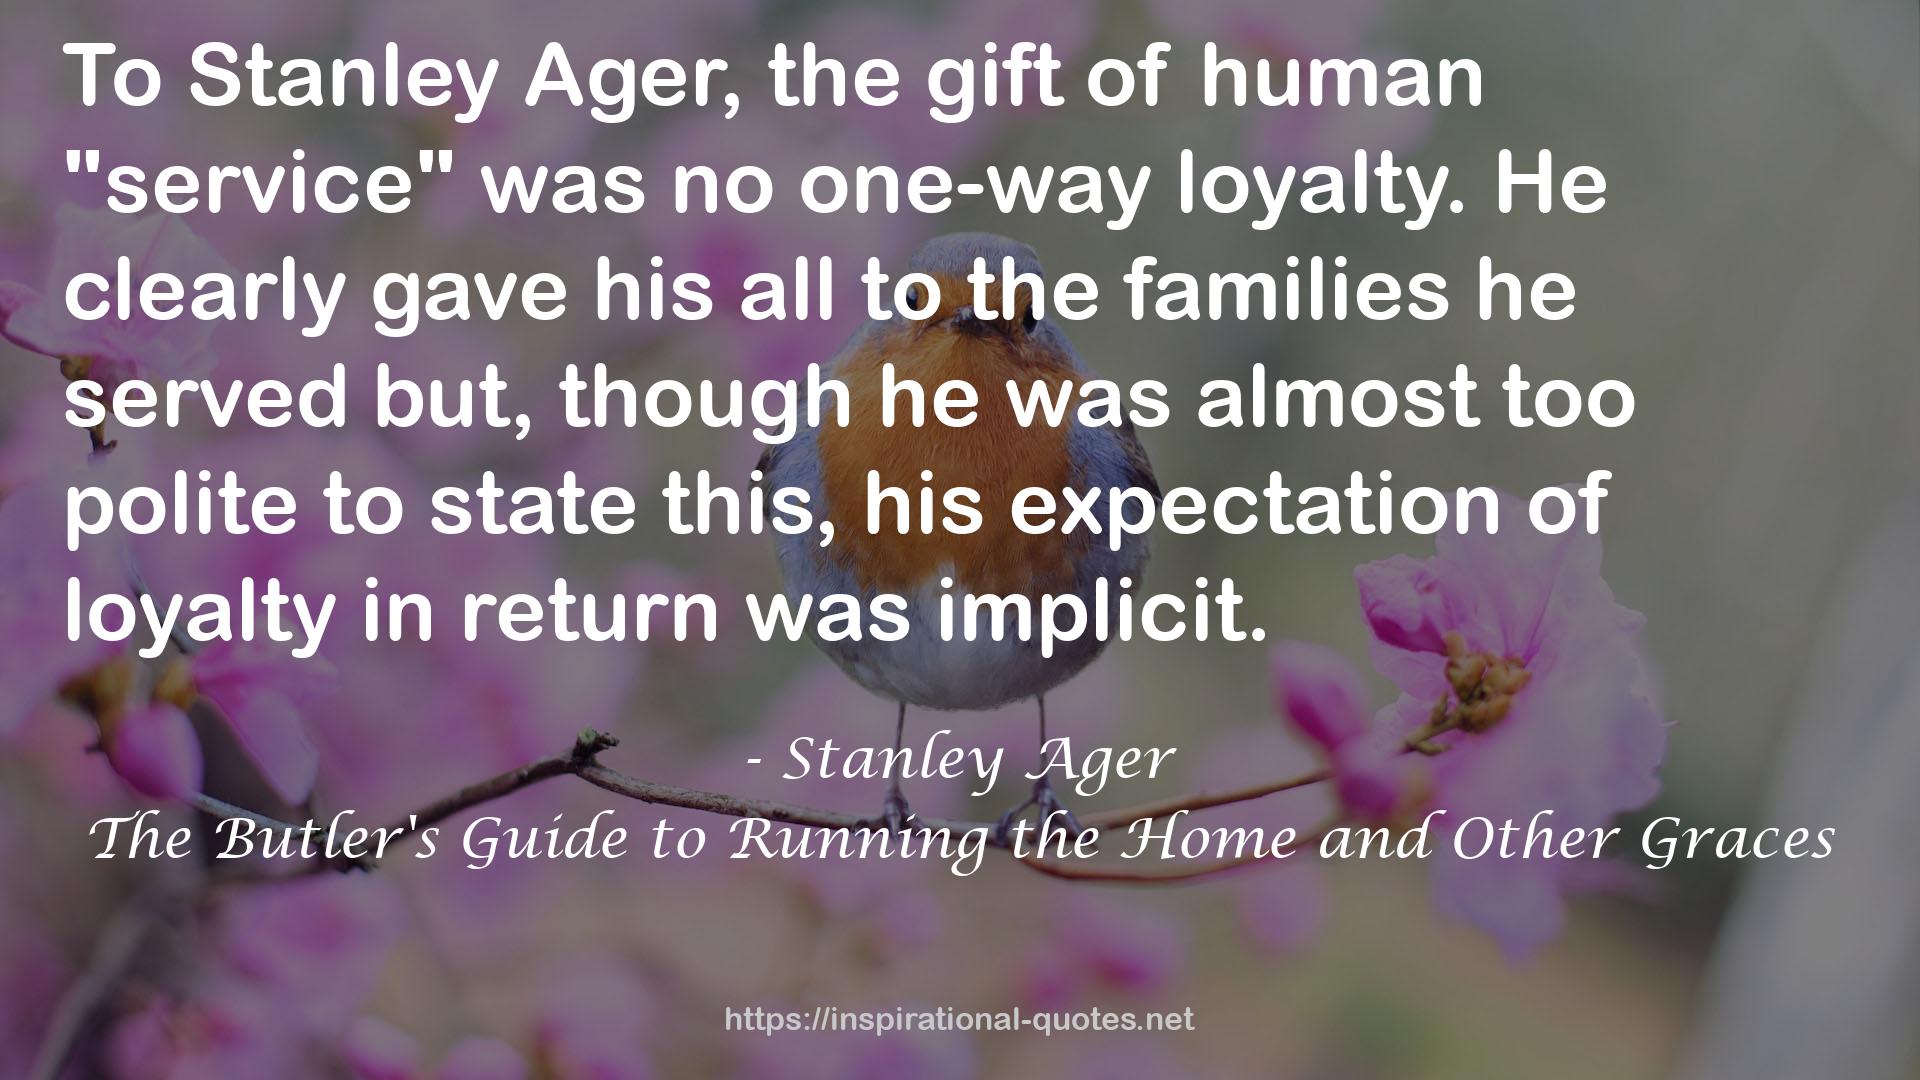 The Butler's Guide to Running the Home and Other Graces QUOTES